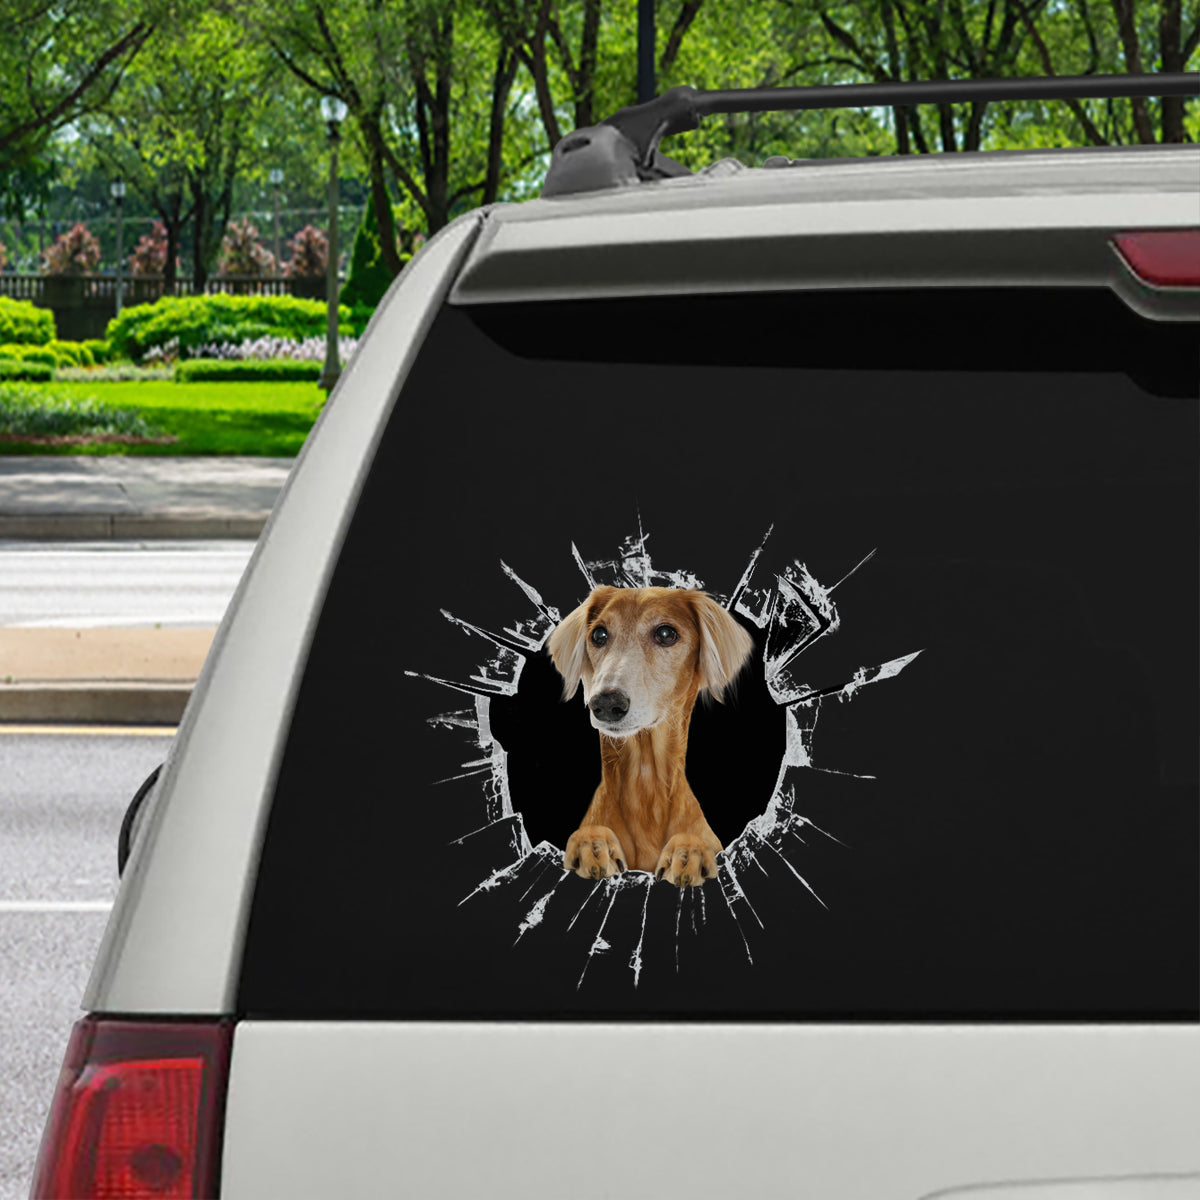 Get In - It's Time For Shopping - Saluki Car Sticker V3